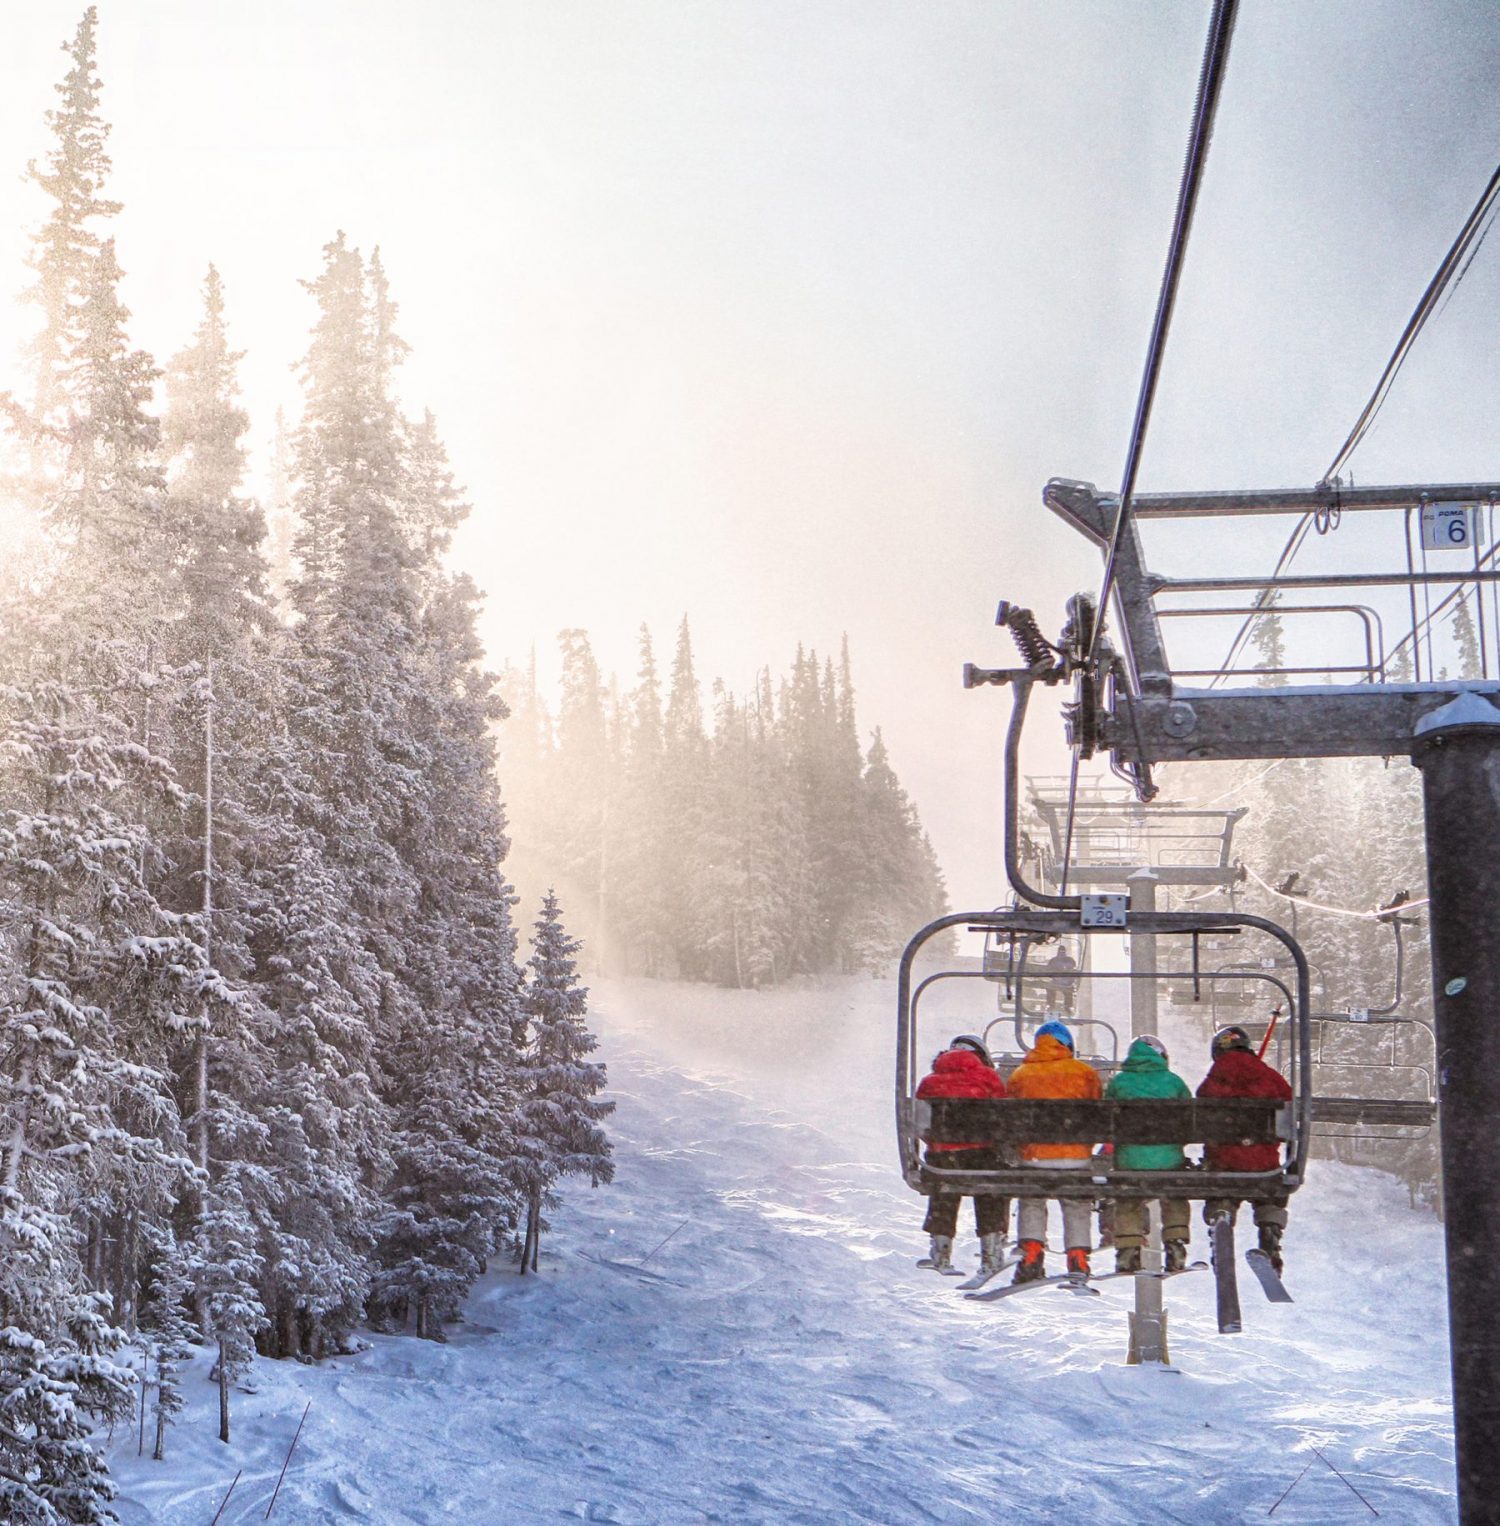 Copper Mountain. Copper Mountain News and recap of the season by GM and President Dustin Lyman.